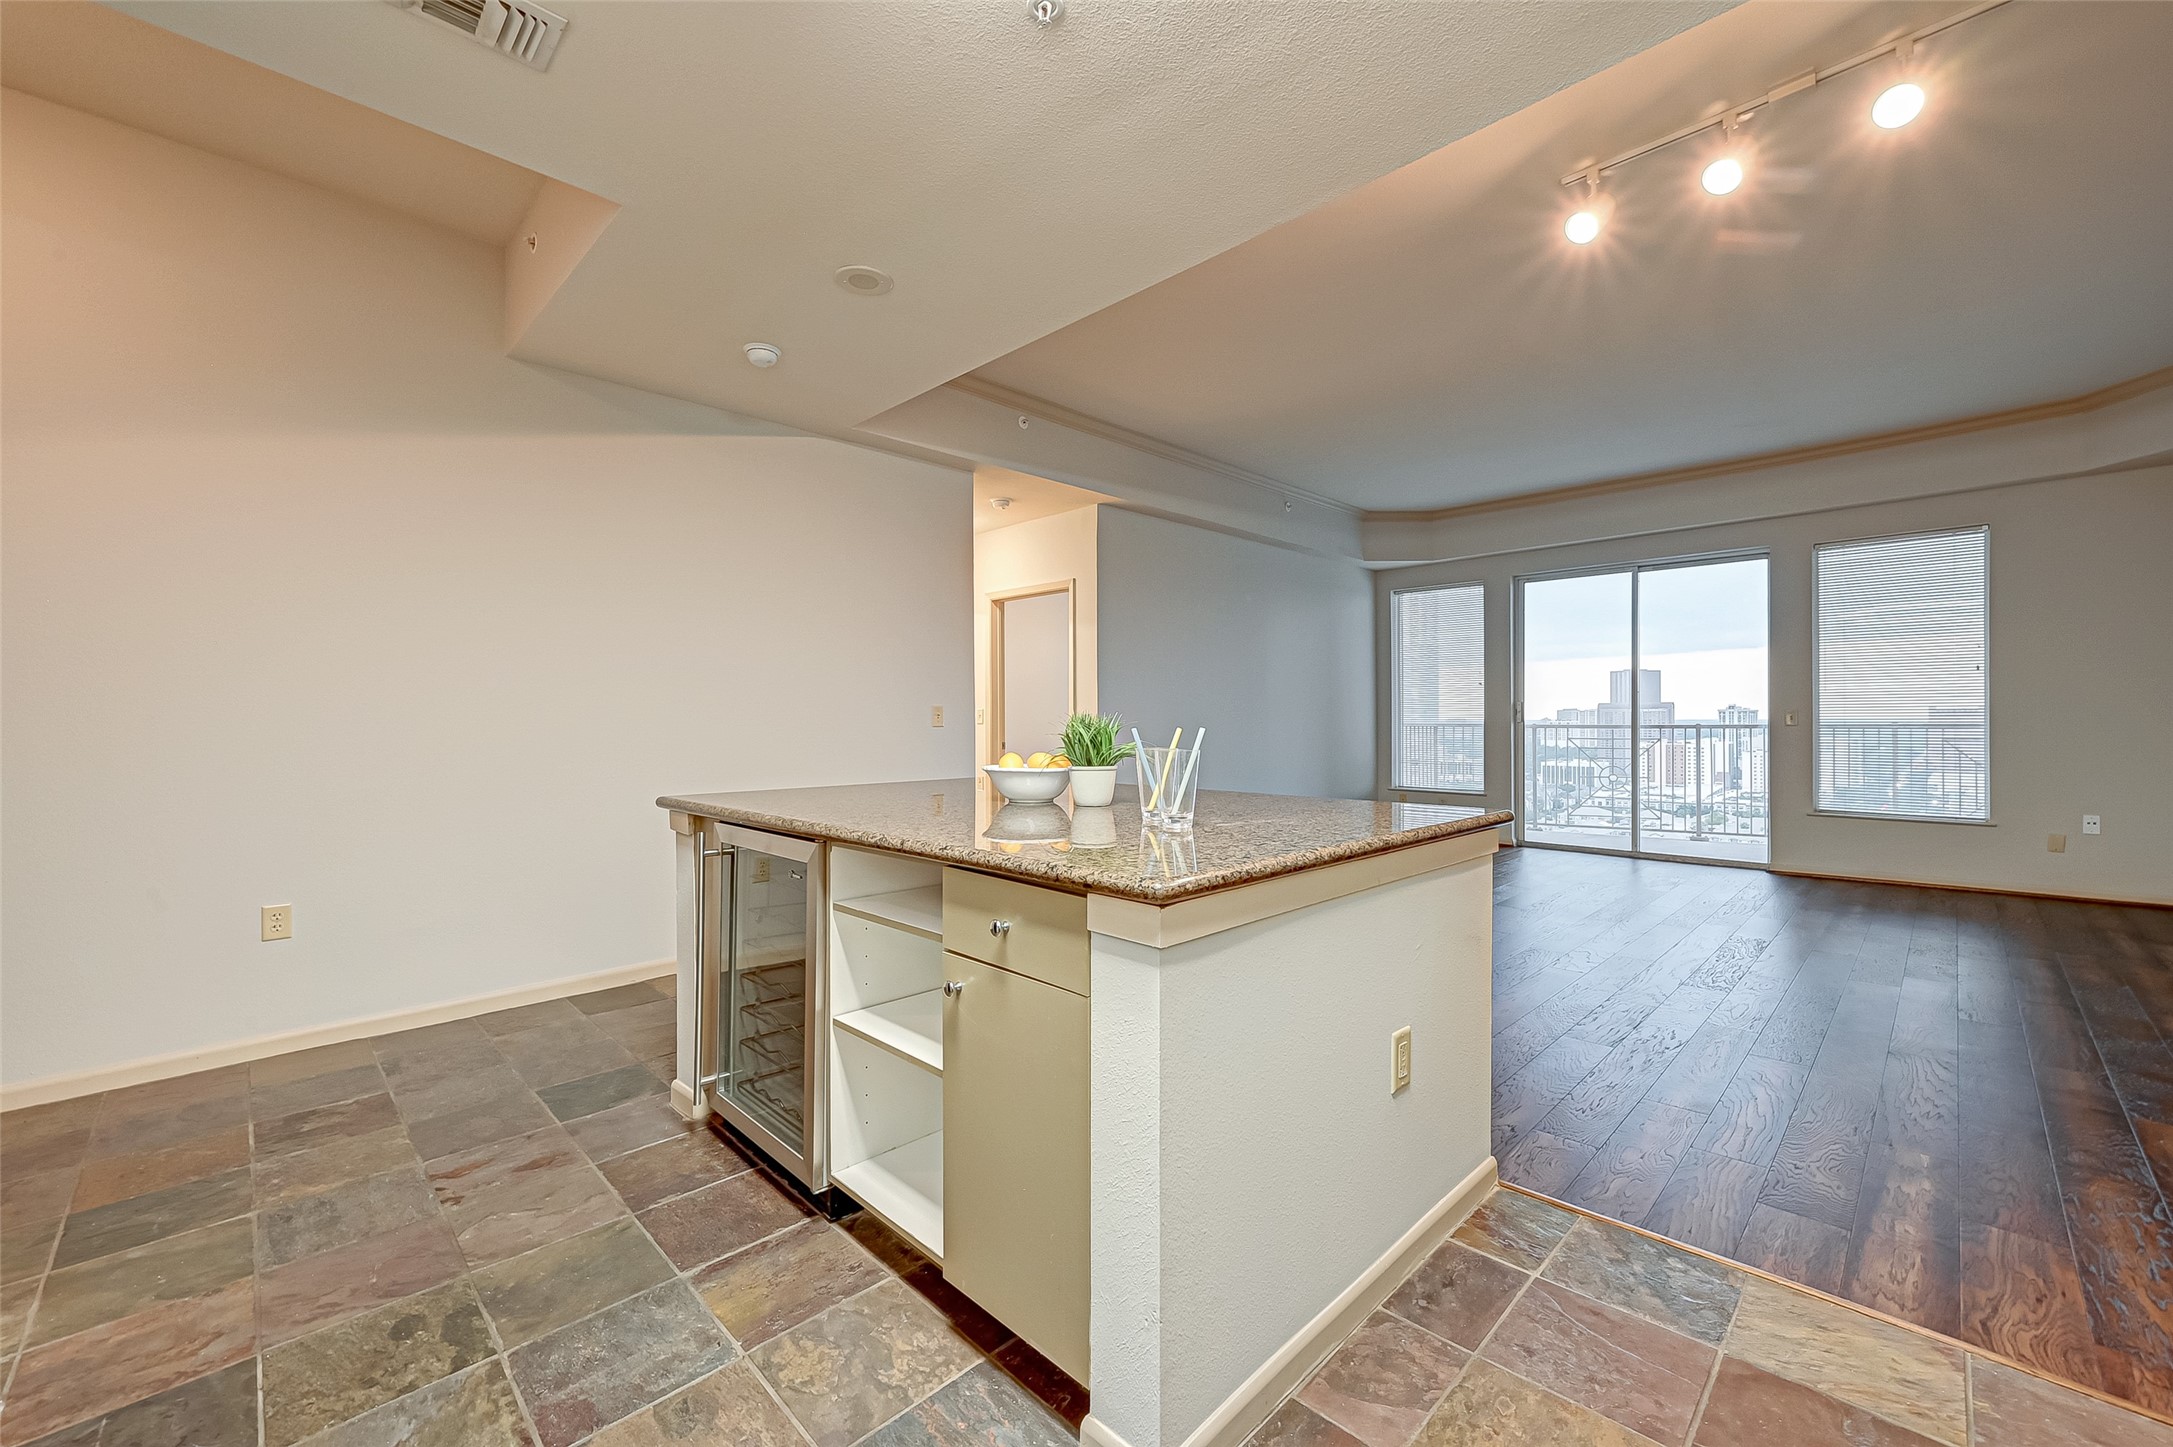 The kitchen is open to the family room. Double glass doors lead you to the balcony.